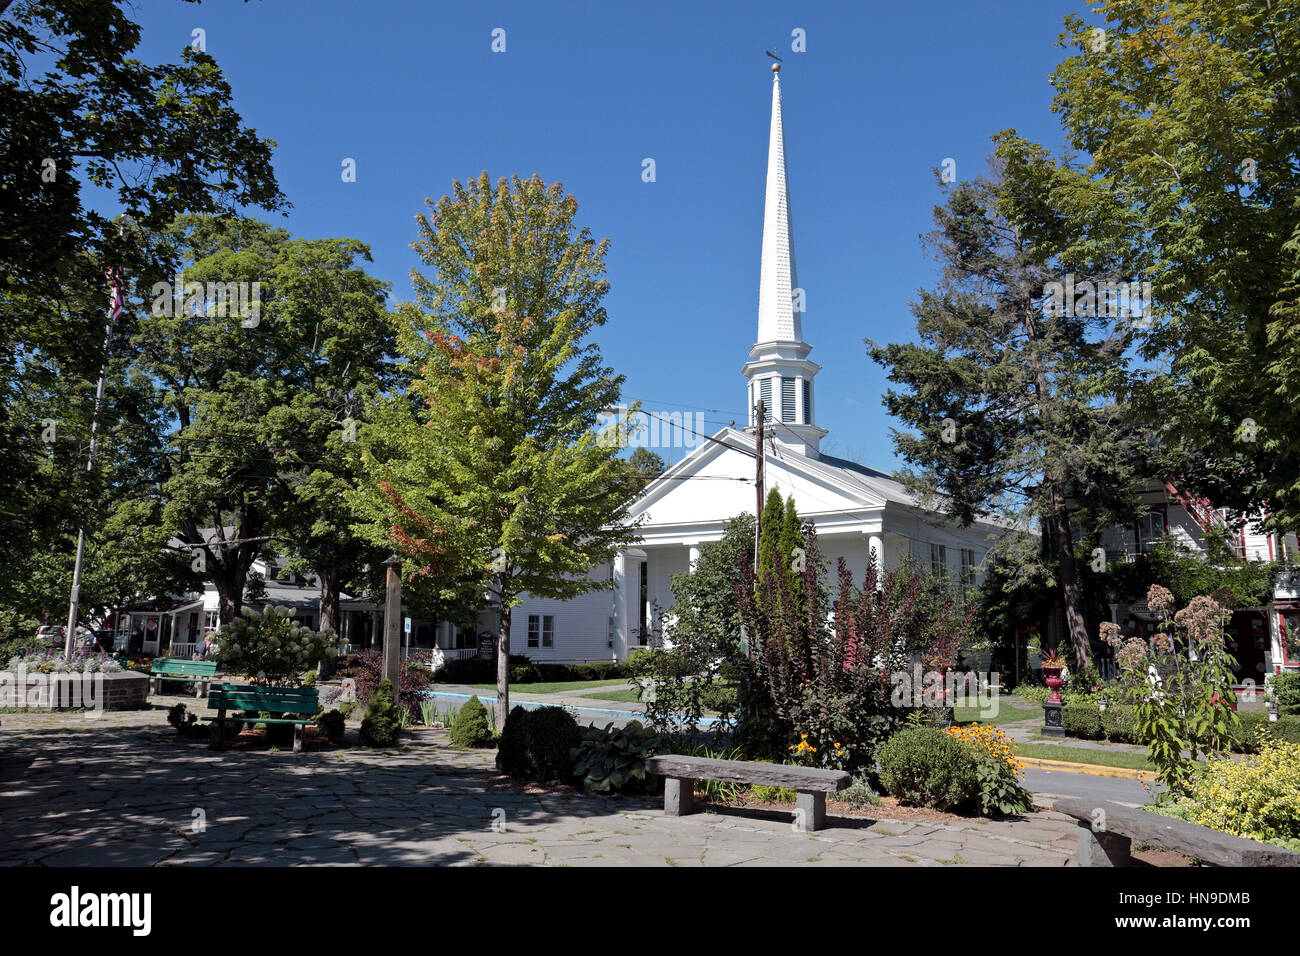 The Dutch Reformed Church in Woodstock, Ulster County, New York, United States. Stock Photo